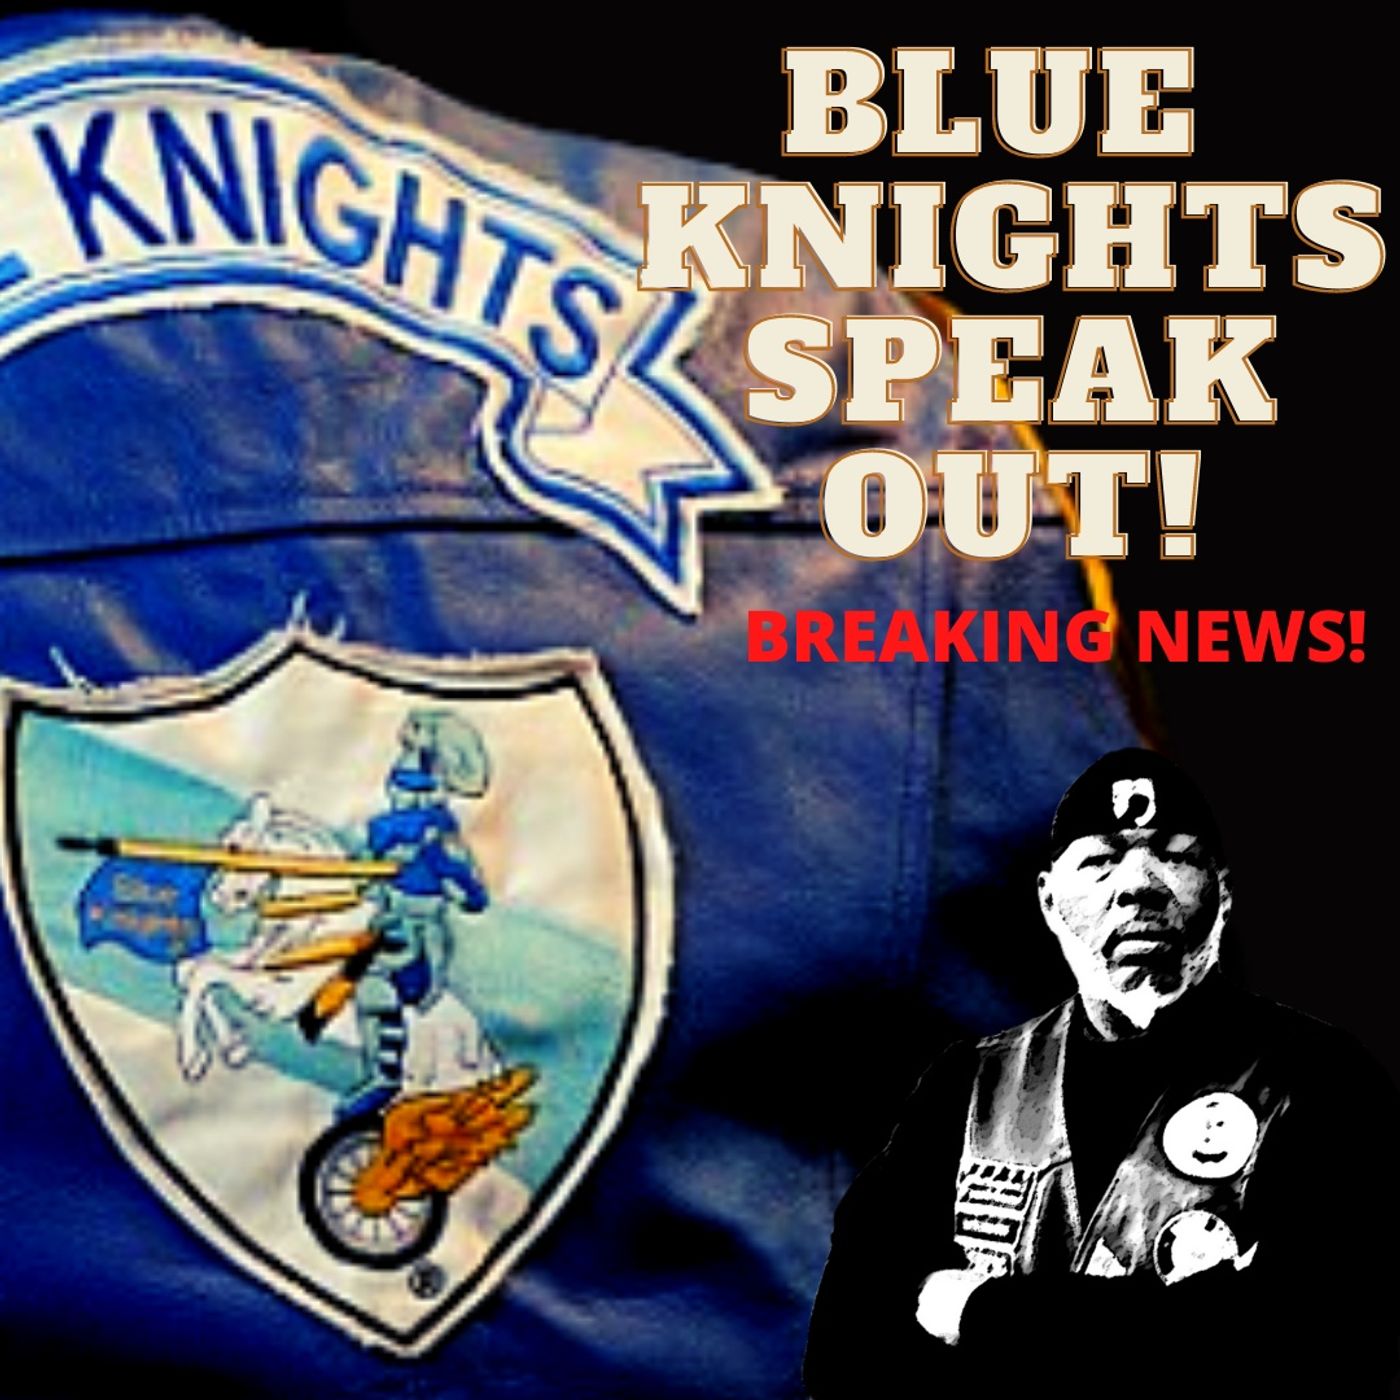 Blue Knights LEMC Speaks Out Against Outlaw(s) MCs.